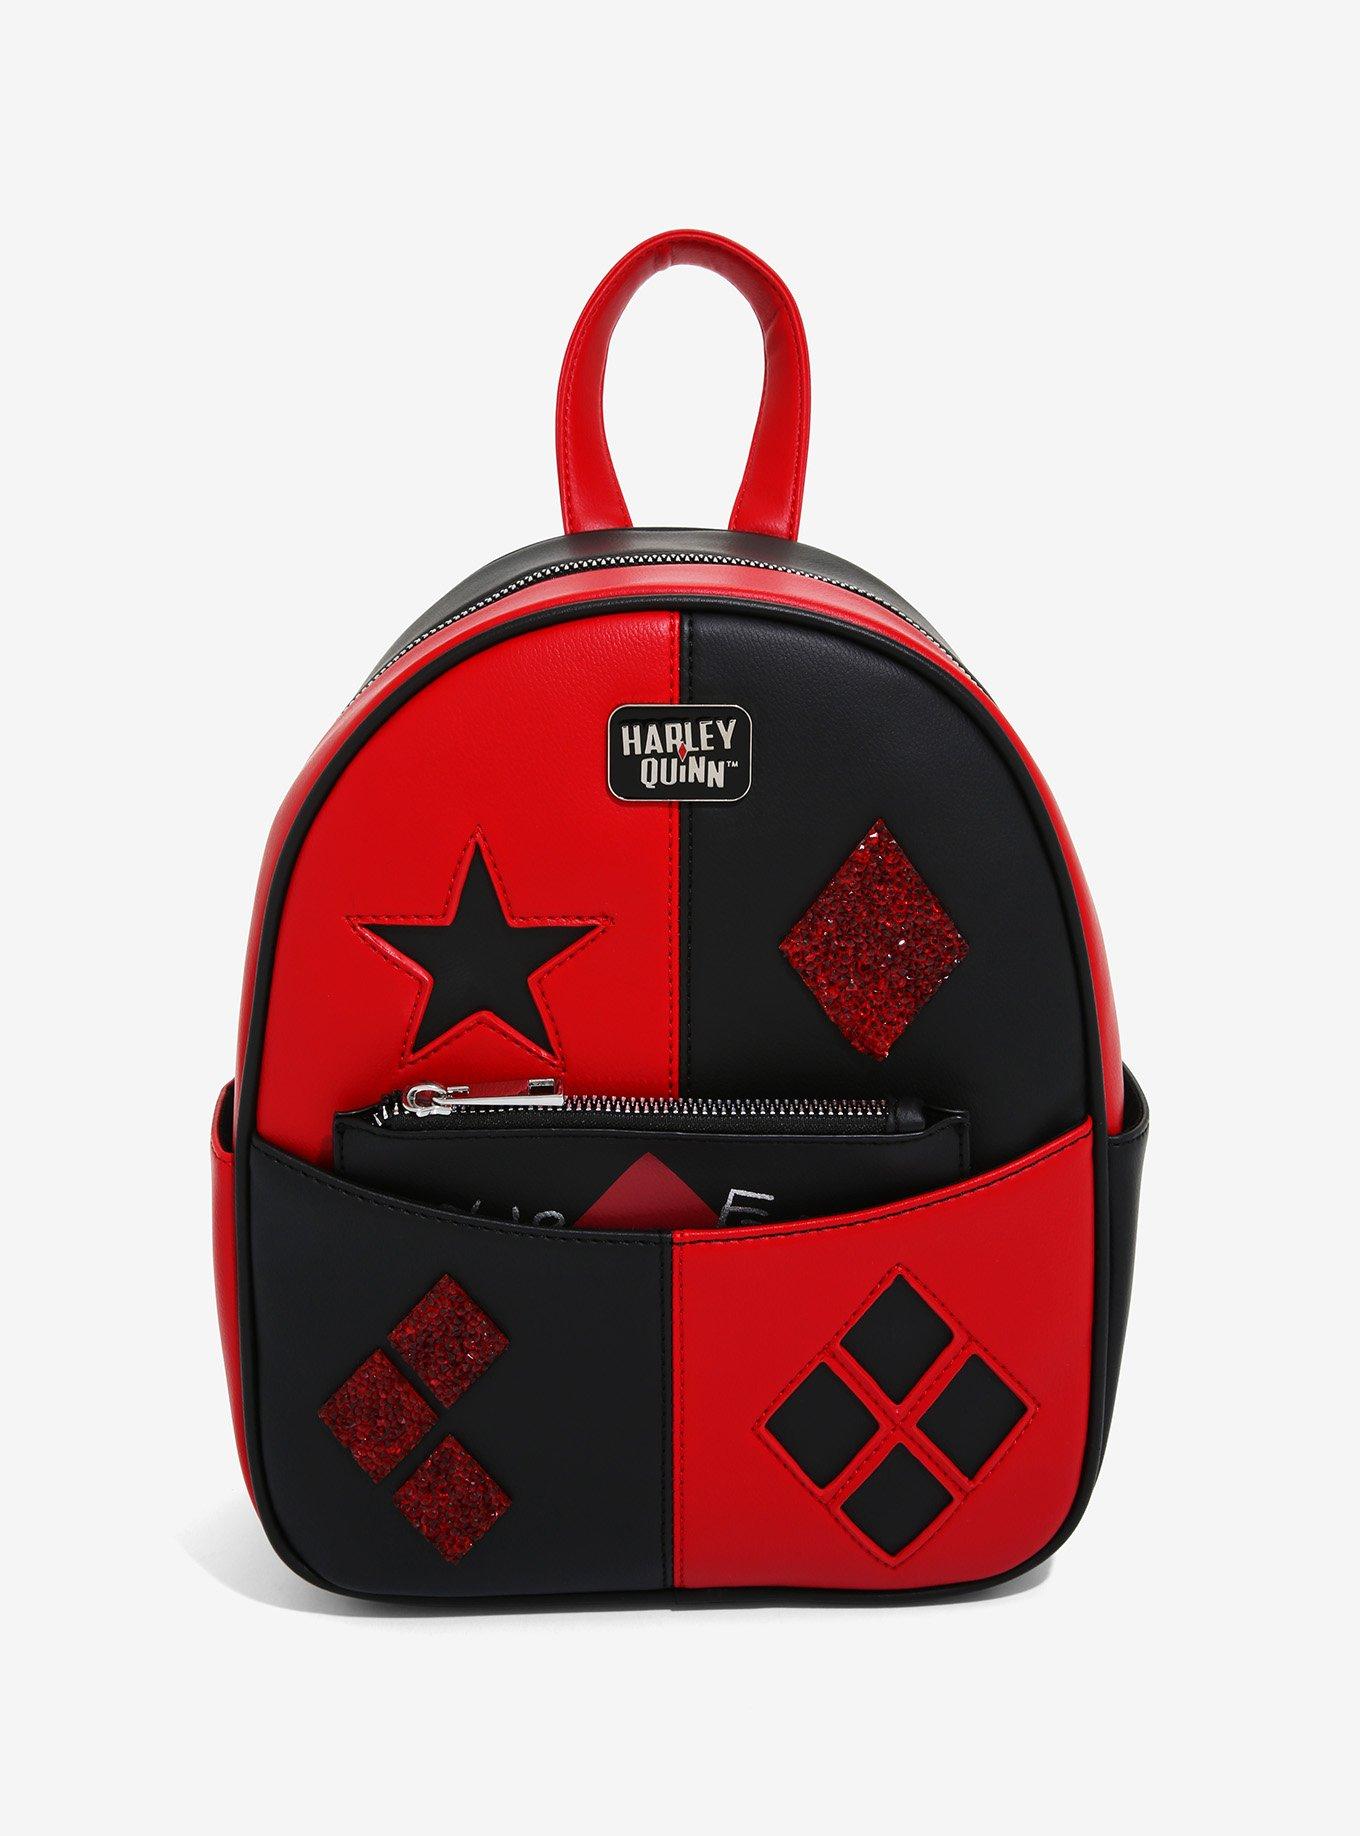 DC Suicide Squad Harley Quinn Mini Backpack. Joker. With Pin And Keychains